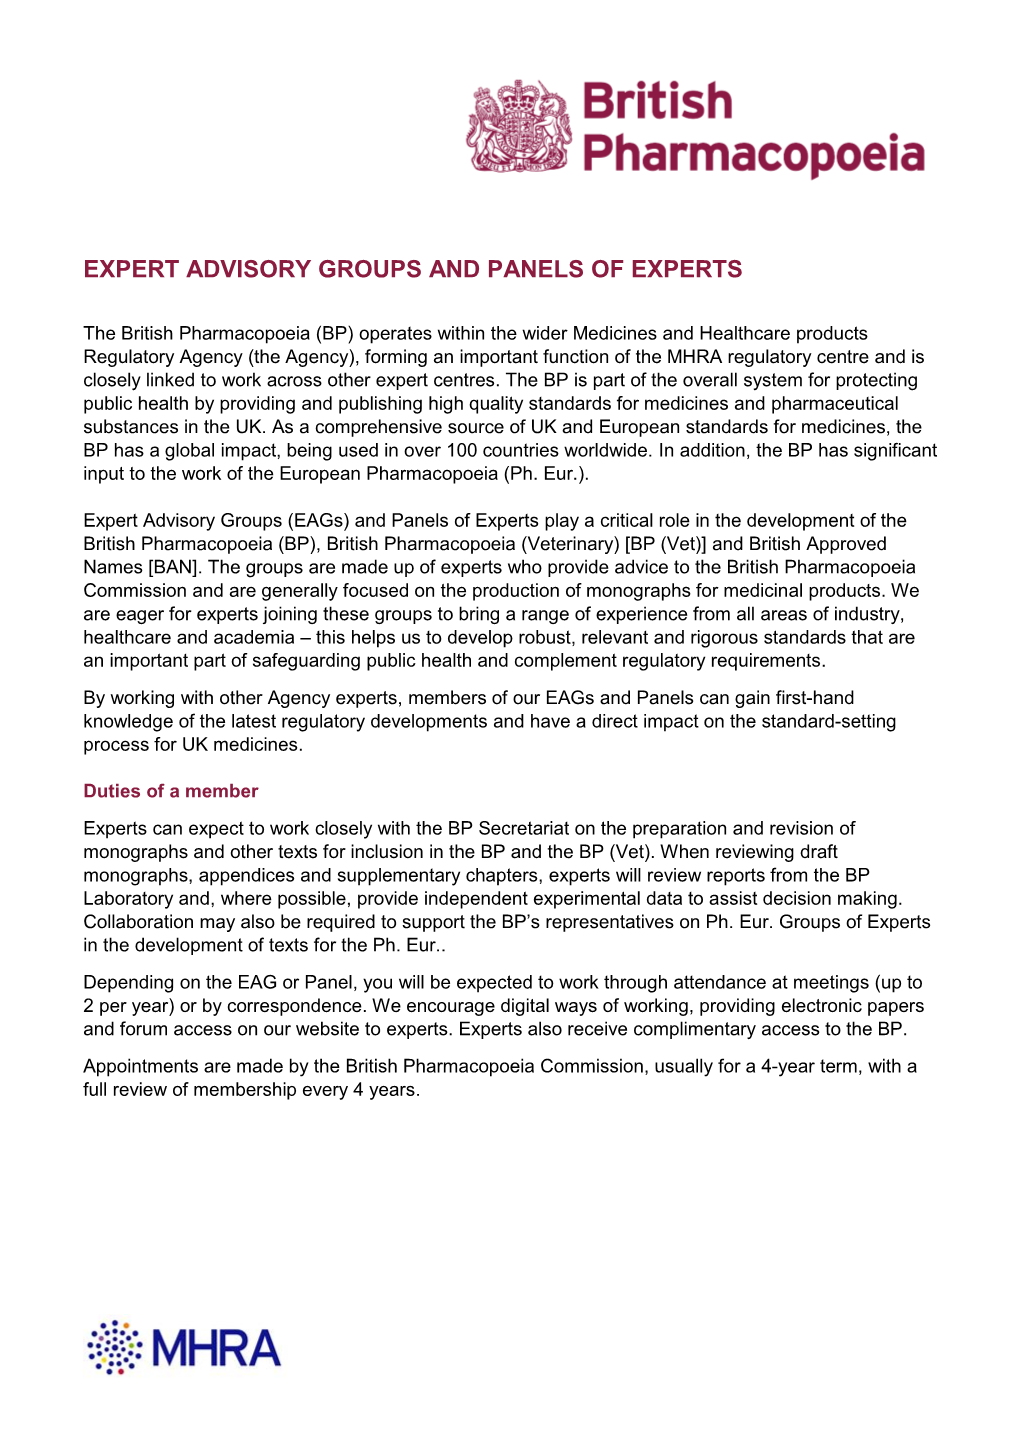 Expert Advisory Groups and Panels of Experts